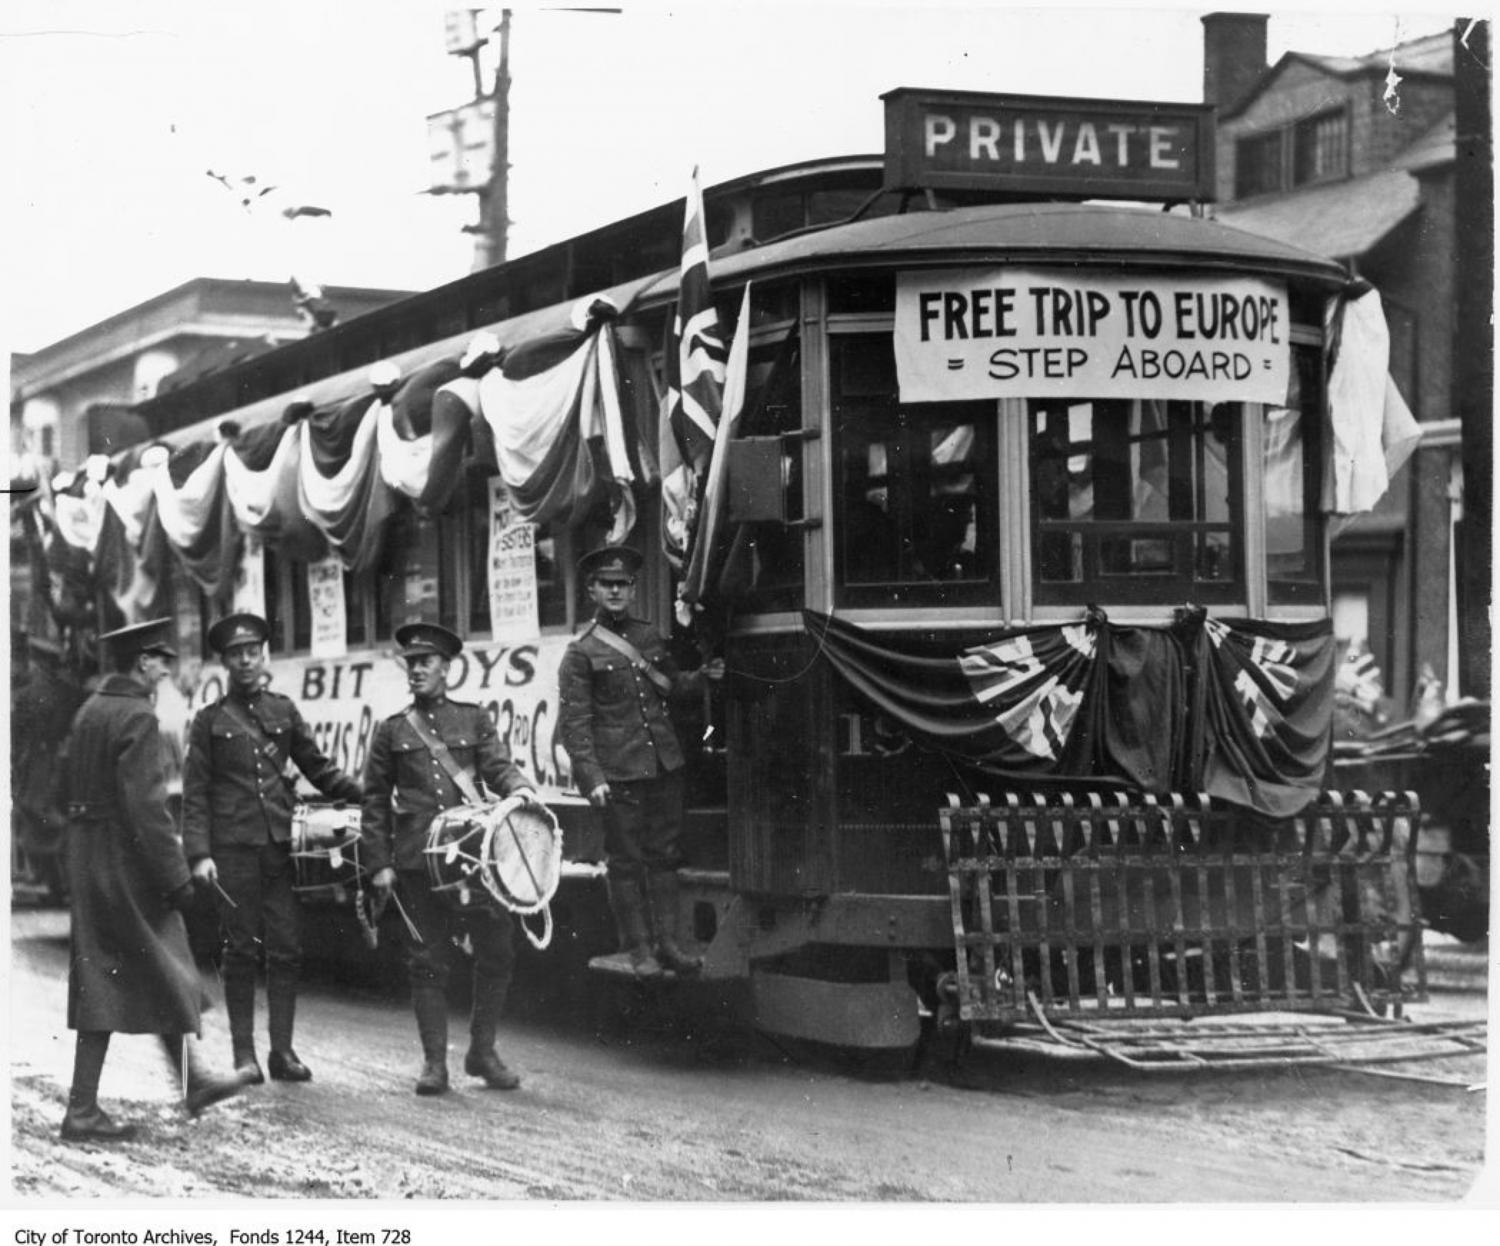 Streetcar recruitment for WWI with banners and enlisted soldiers